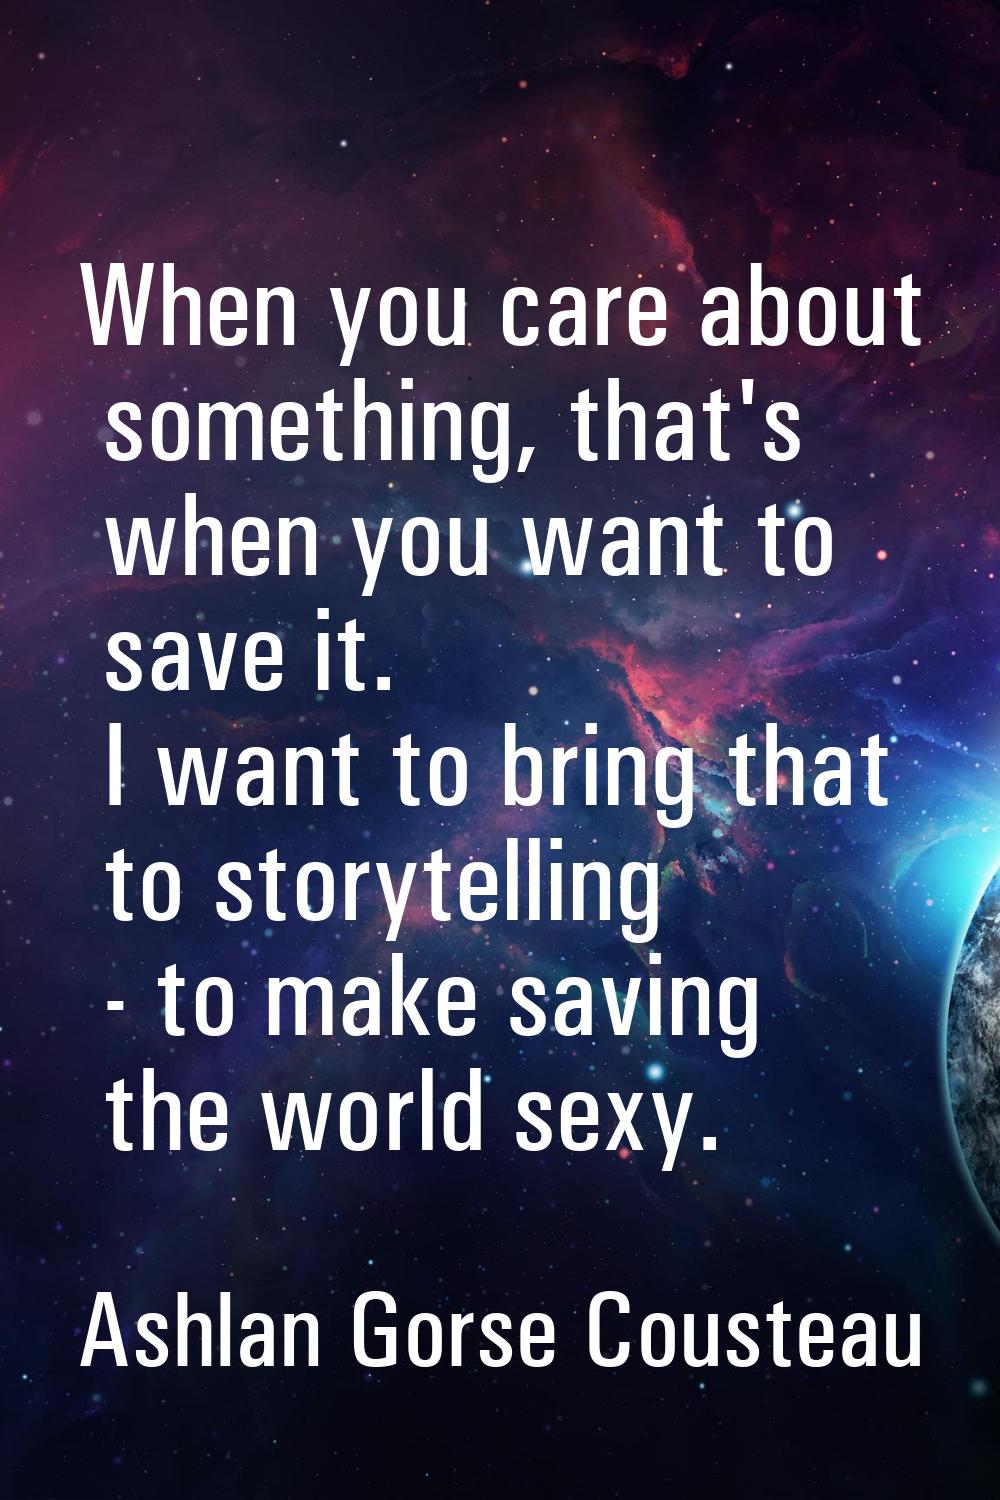 When you care about something, that's when you want to save it. I want to bring that to storytellin